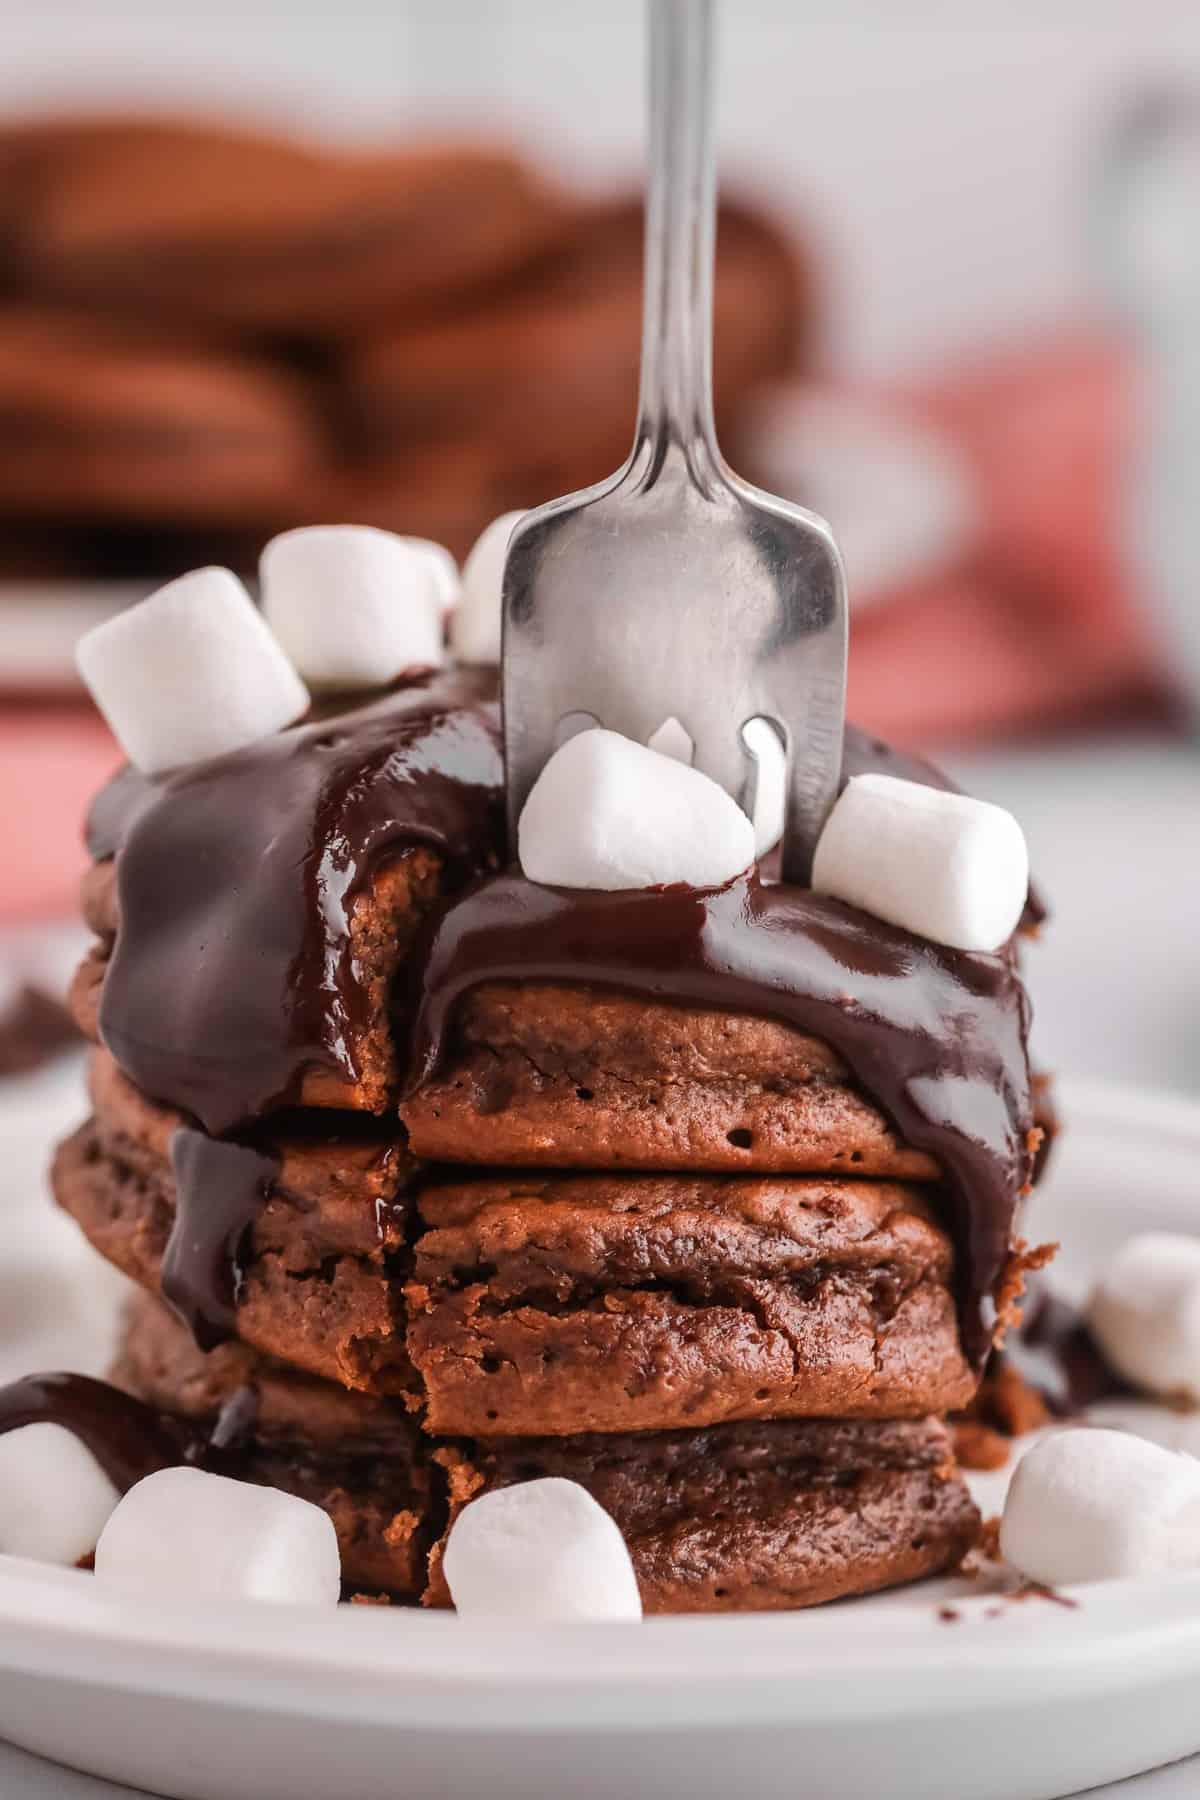 A fork digging into a stack of chocolate pancakes with chocolate syrup.